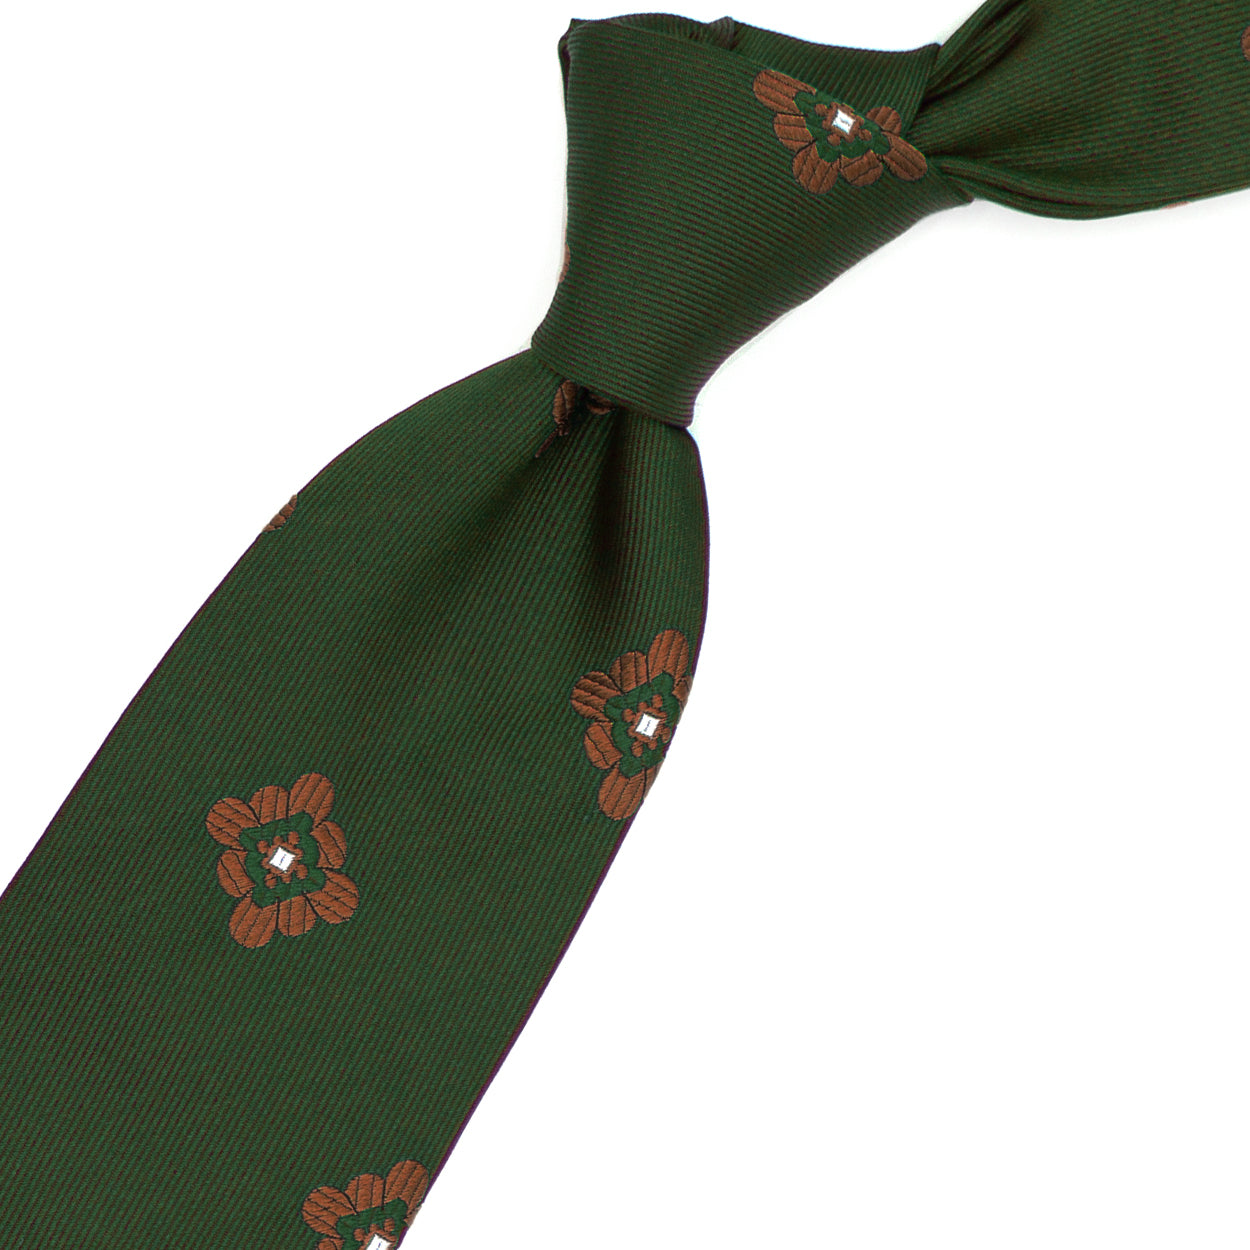 Green tie with brown flowers